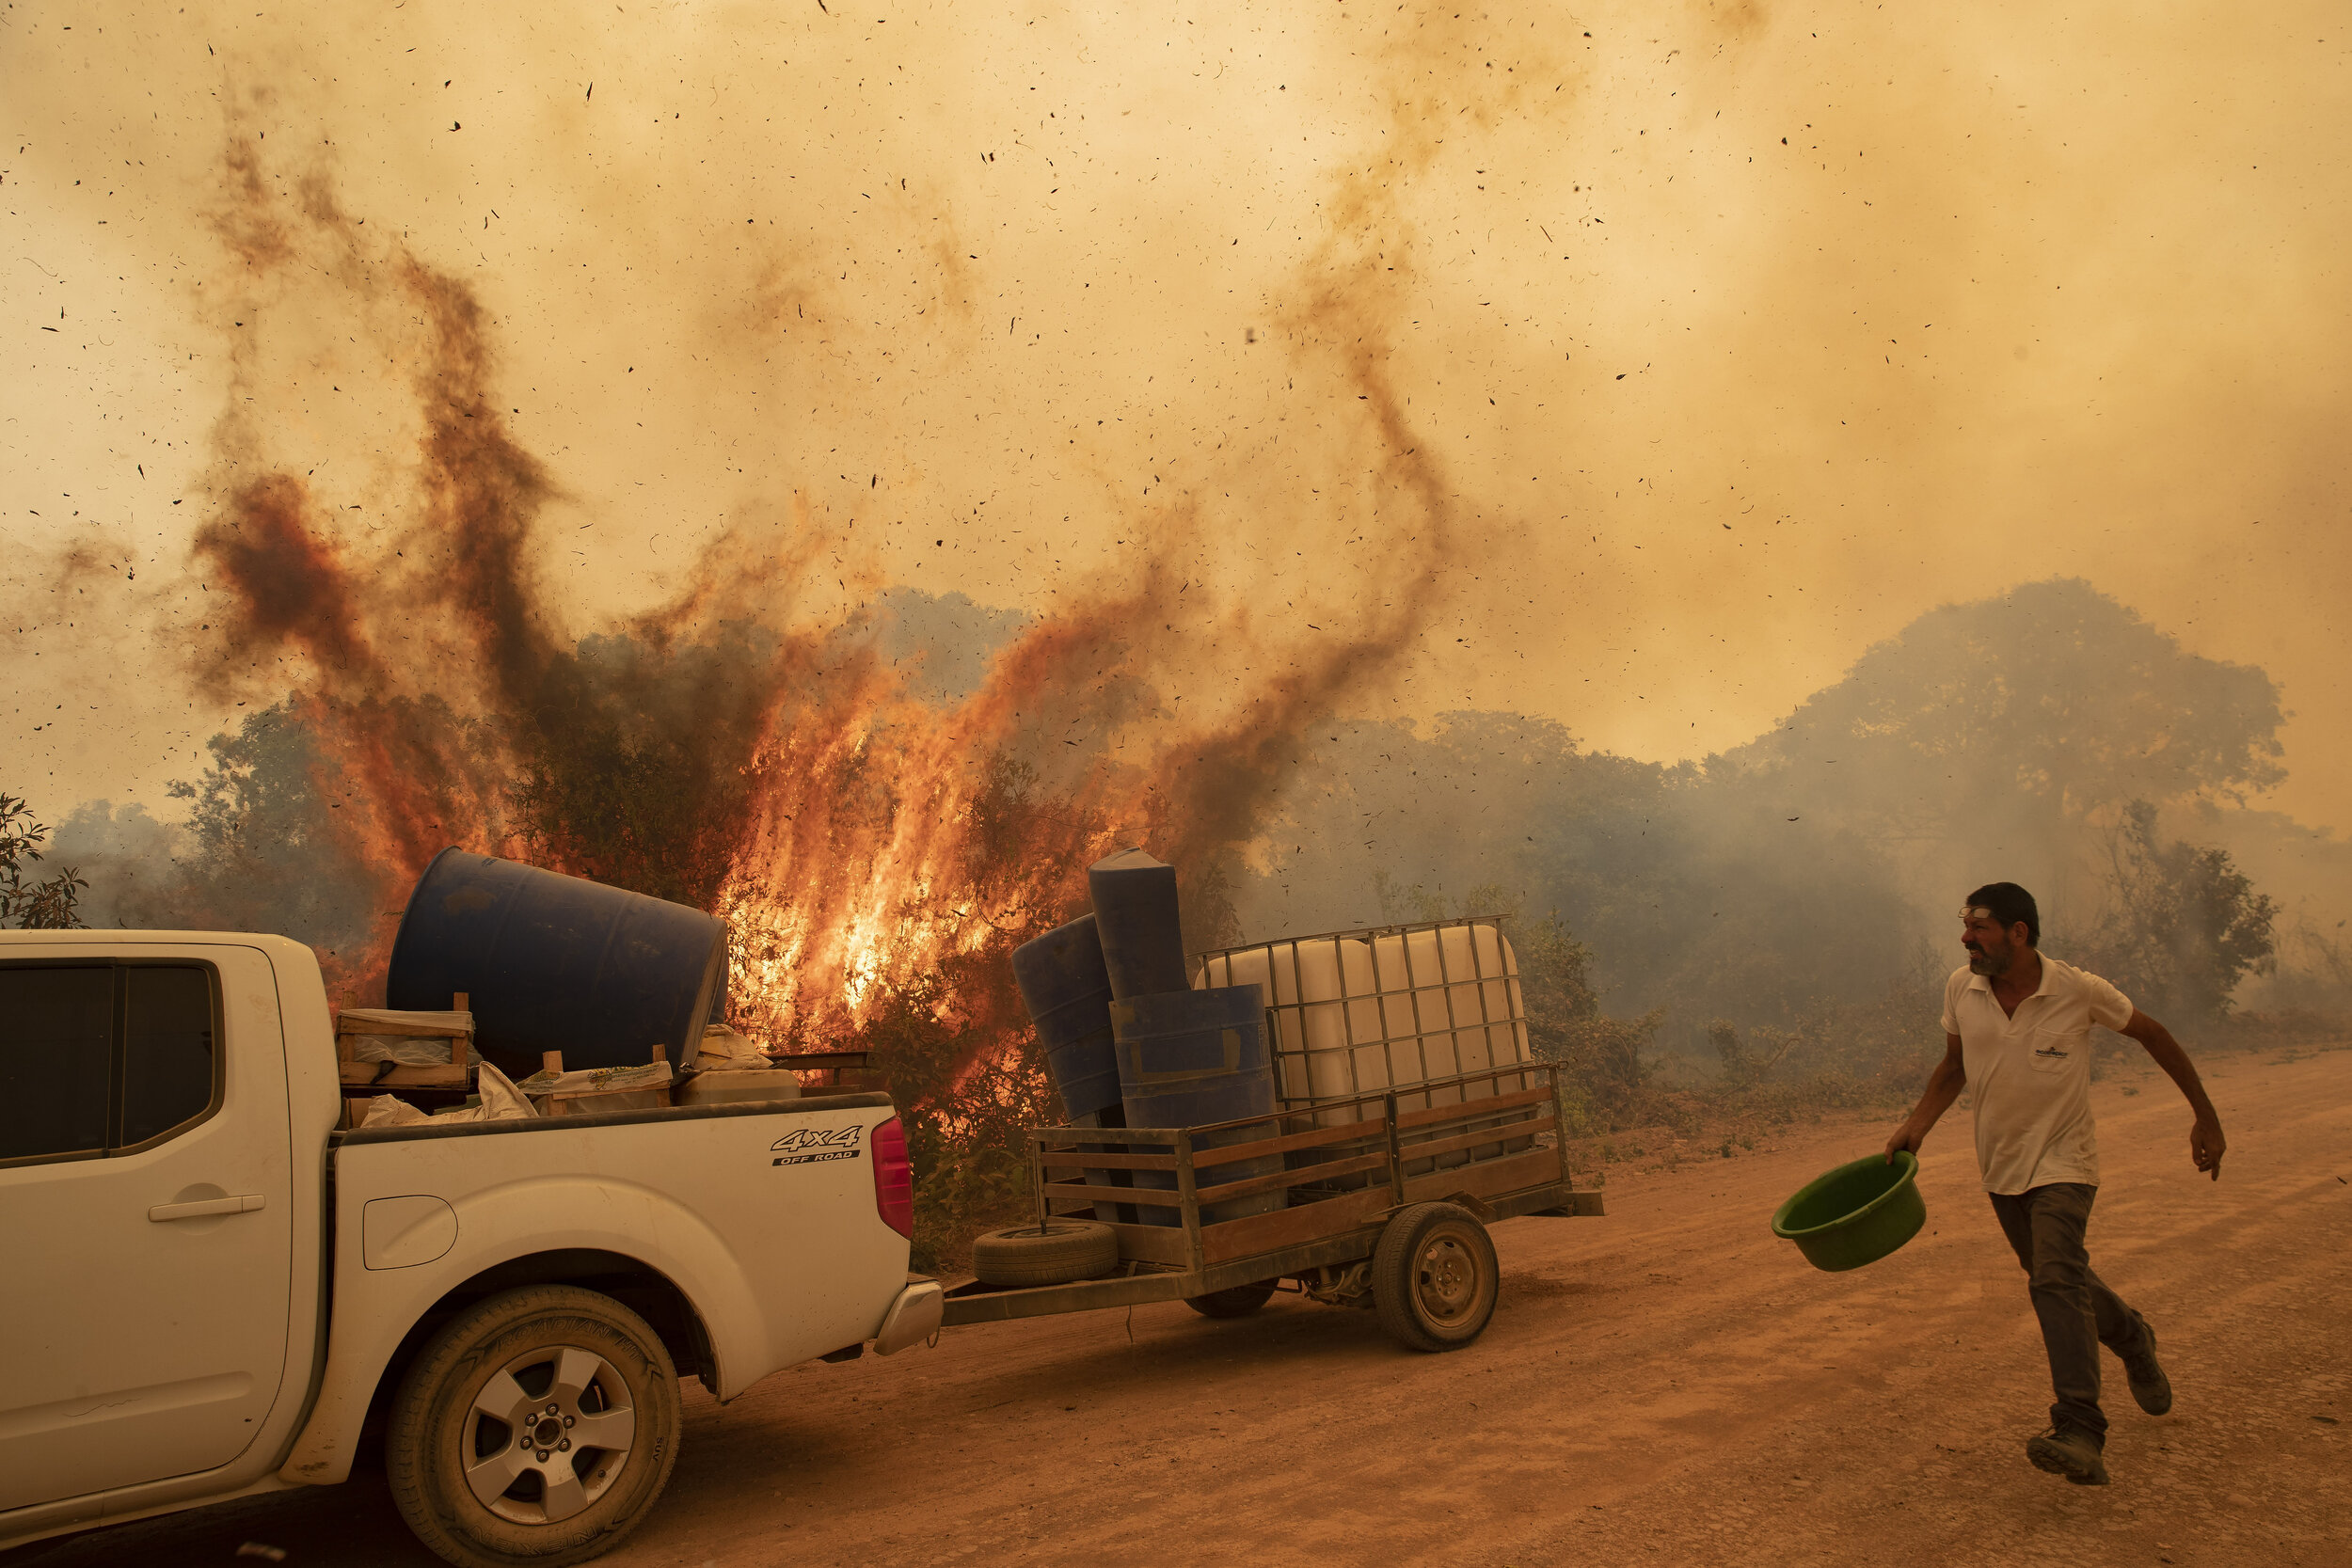  Volunteer Divino Humberto tries to douse the fire with a bucket along a dirt road off the Trans-Pantanal highway in the Pantanal wetlands near Pocone, Mato Grosso state, Brazil, Friday, Sept. 11, 2020. (AP Photo/Andre Penner) 